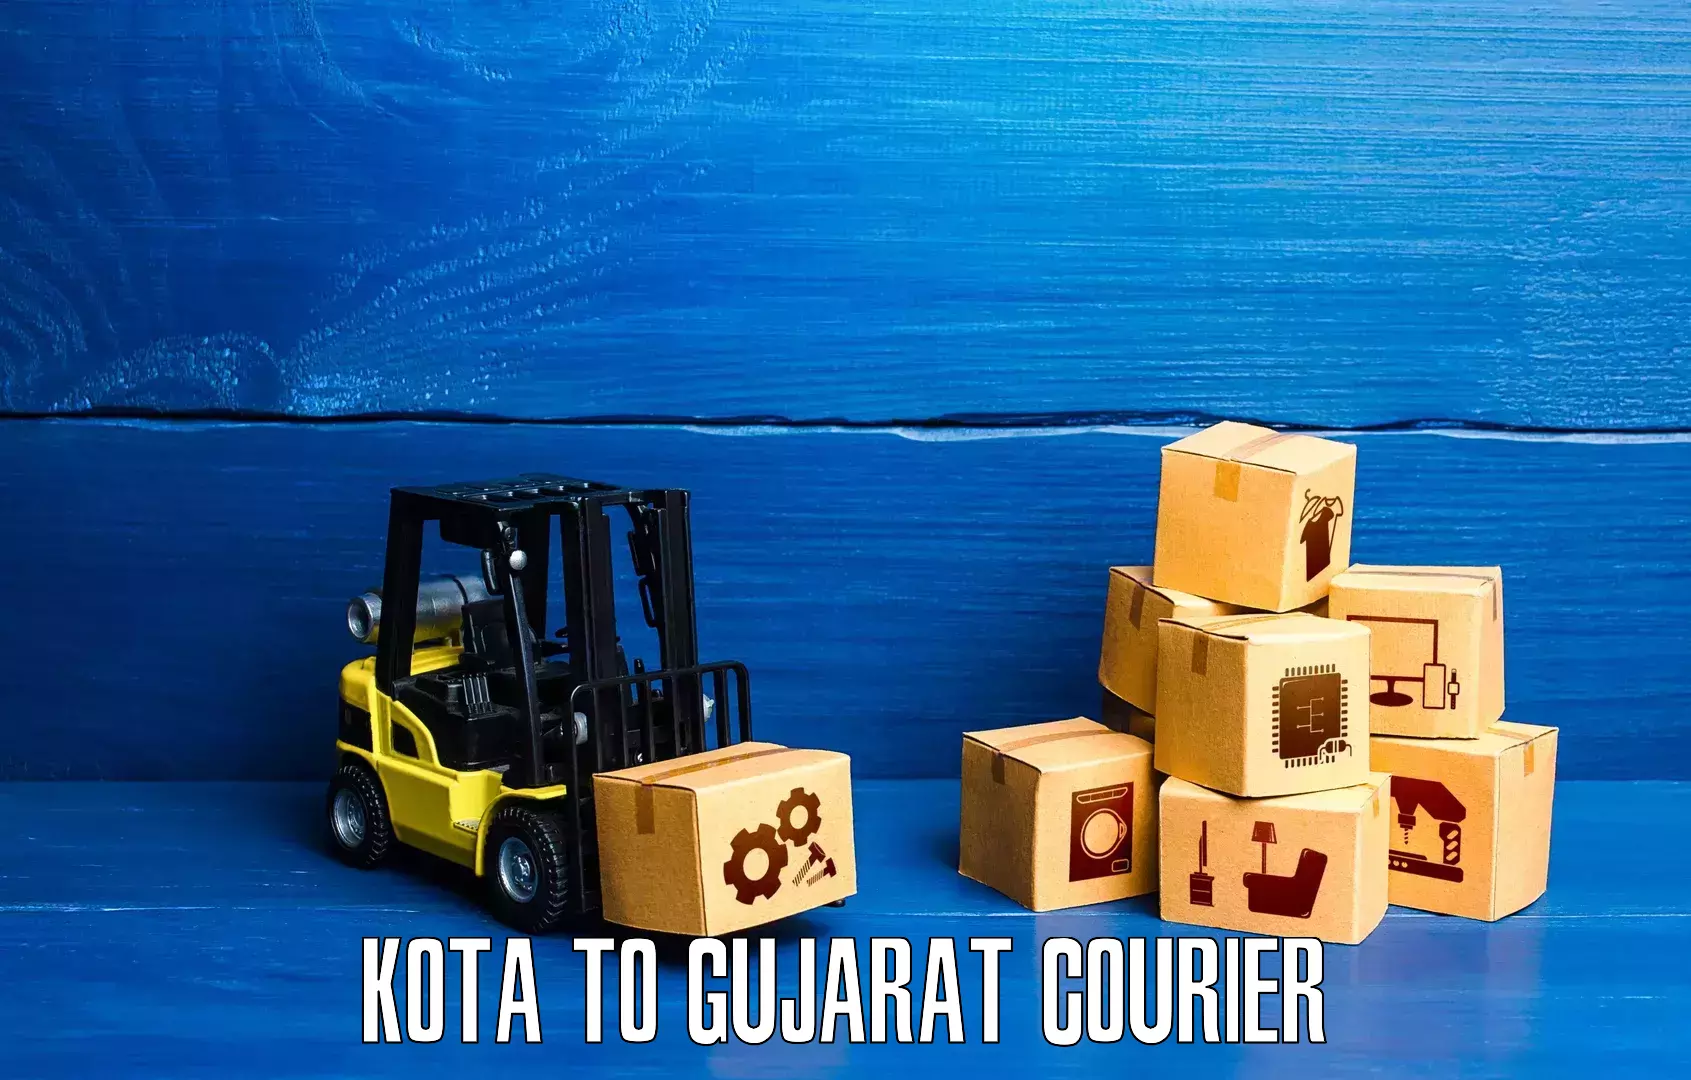 Courier service booking Kota to Gujarat